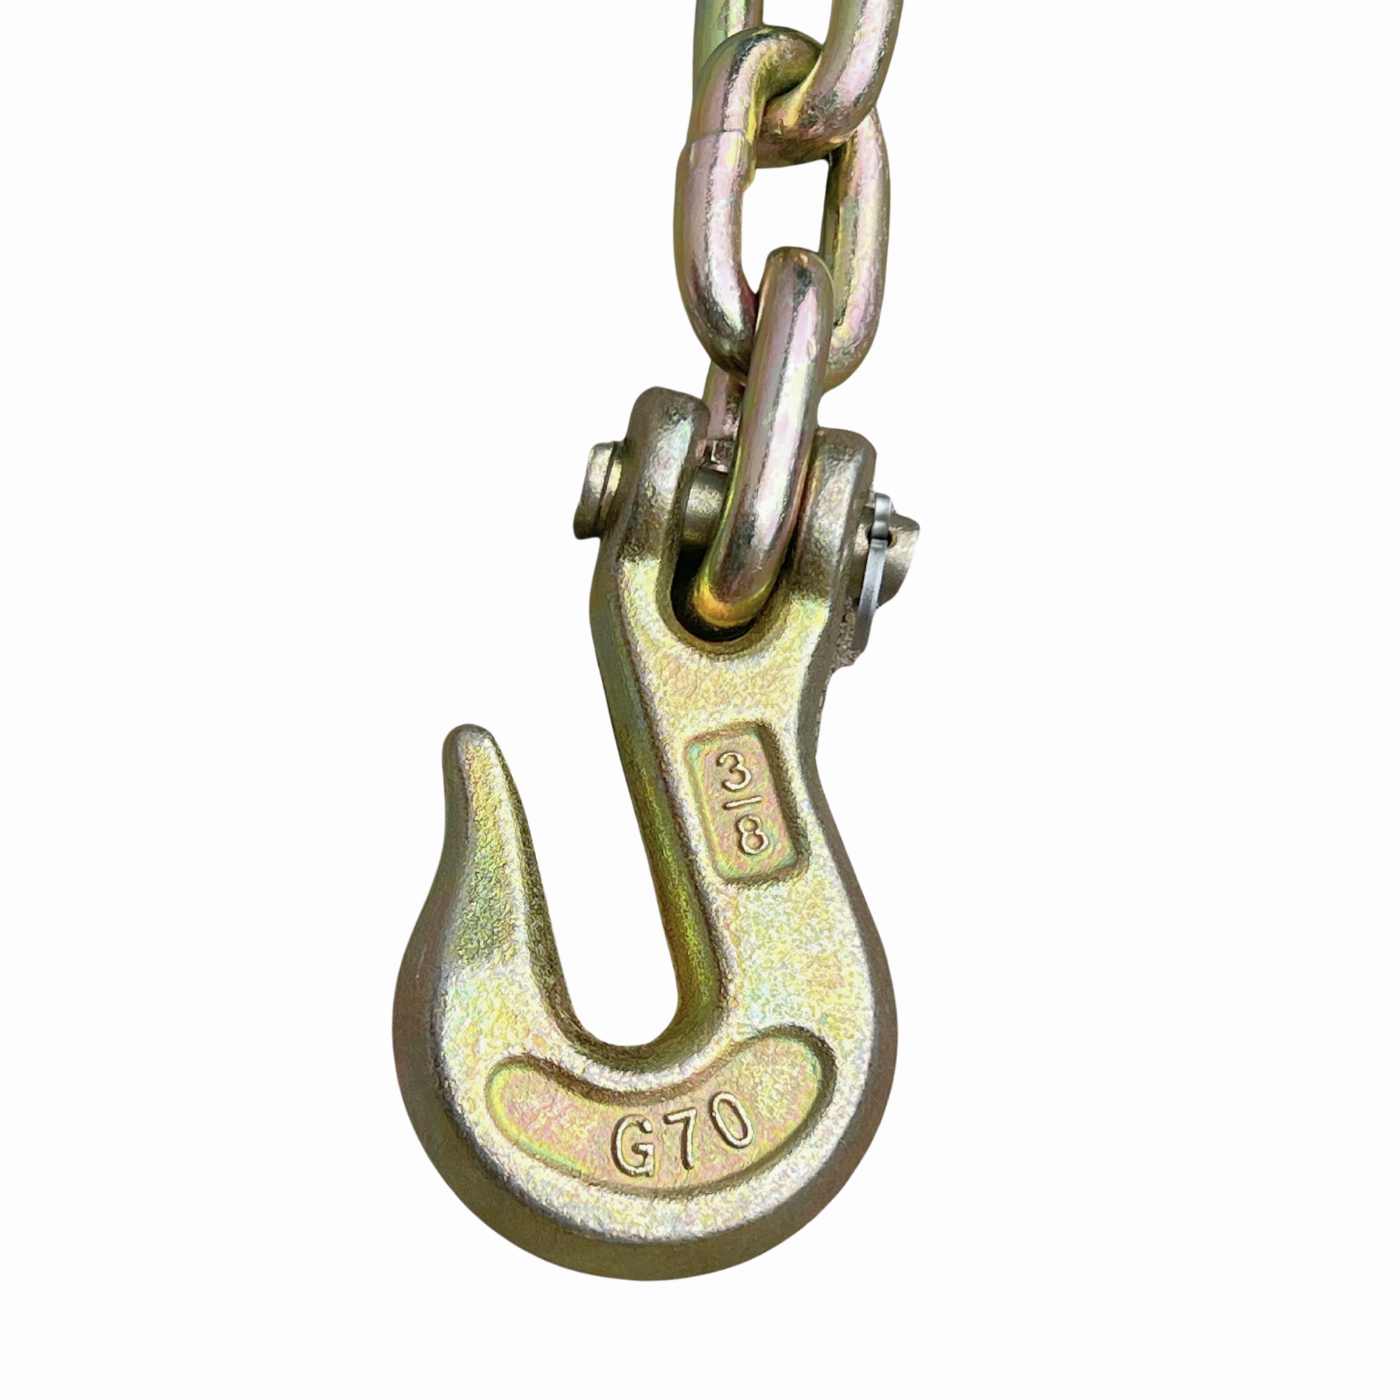 3/8" x 20 Transport Chain with Grab Hooks G70 6,600 lb. WLL